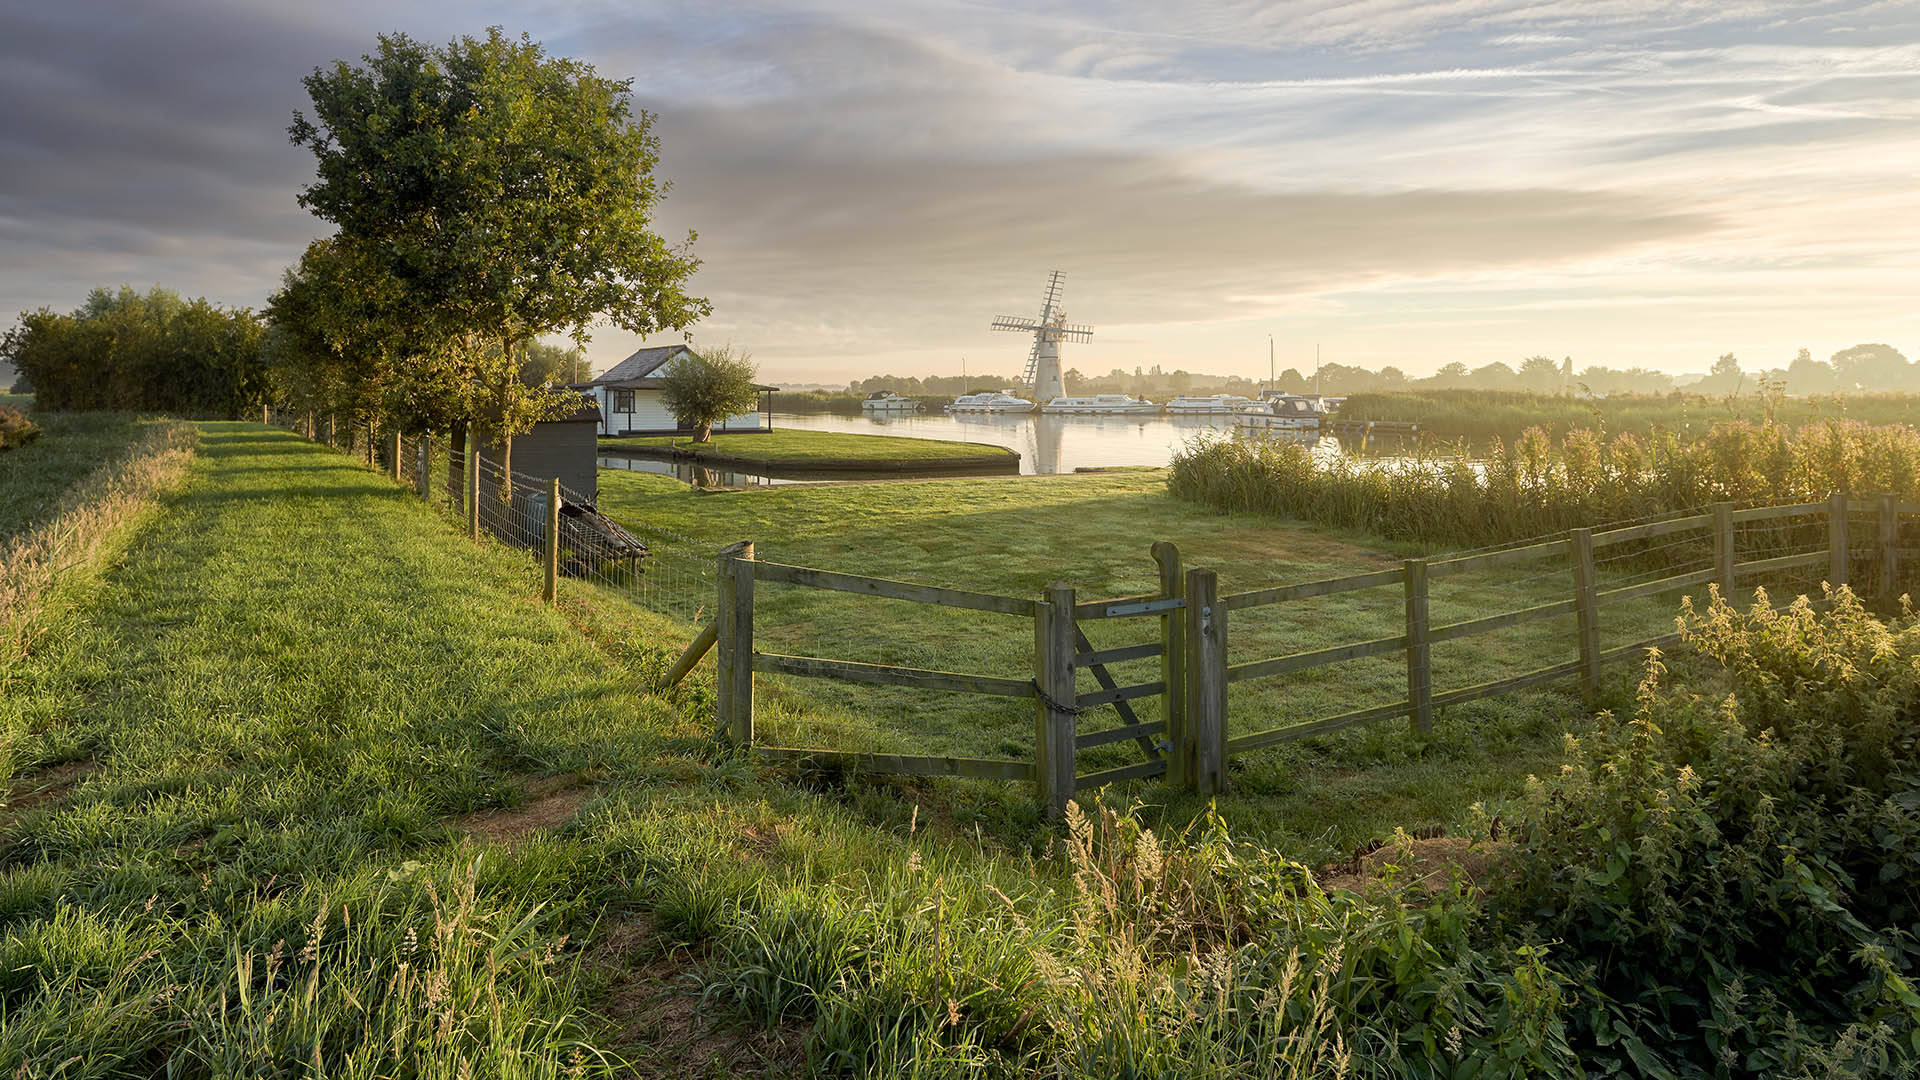 The Norfolk Broads In Thurne, England Wallpaper